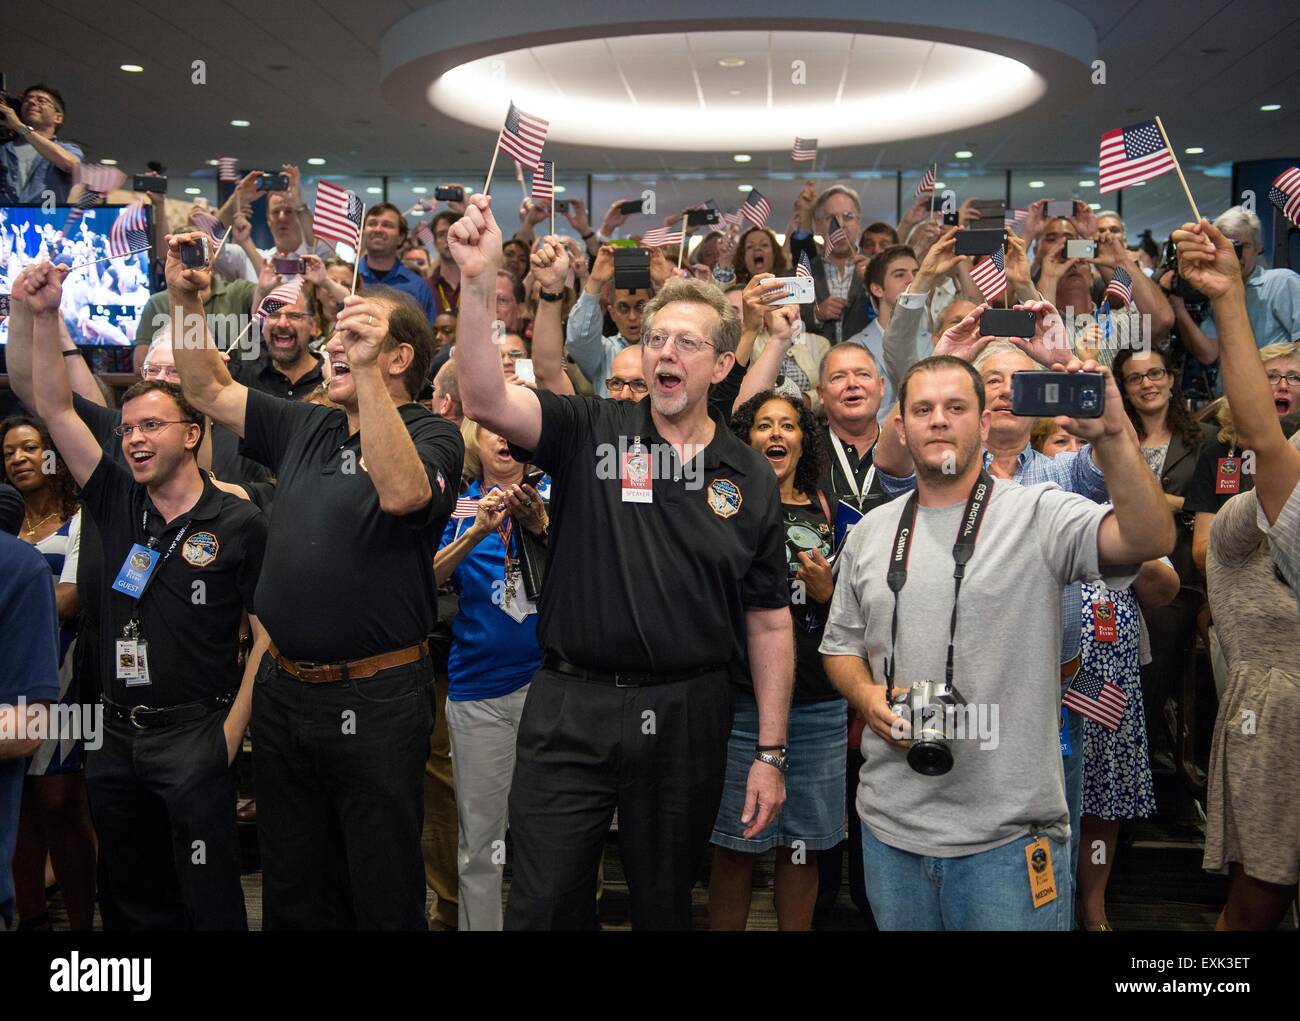 Laurel, Maryland, USA. 14th July, 2015. NASA Planetary Science Division Director Jim Green joins members of the New Horizons science team as they countdown to the closest approach to Pluto during the flyby of the space probe at the Johns Hopkins University Applied Physics Laboratory July 14, 2015 in Laurel, Maryland. Stock Photo